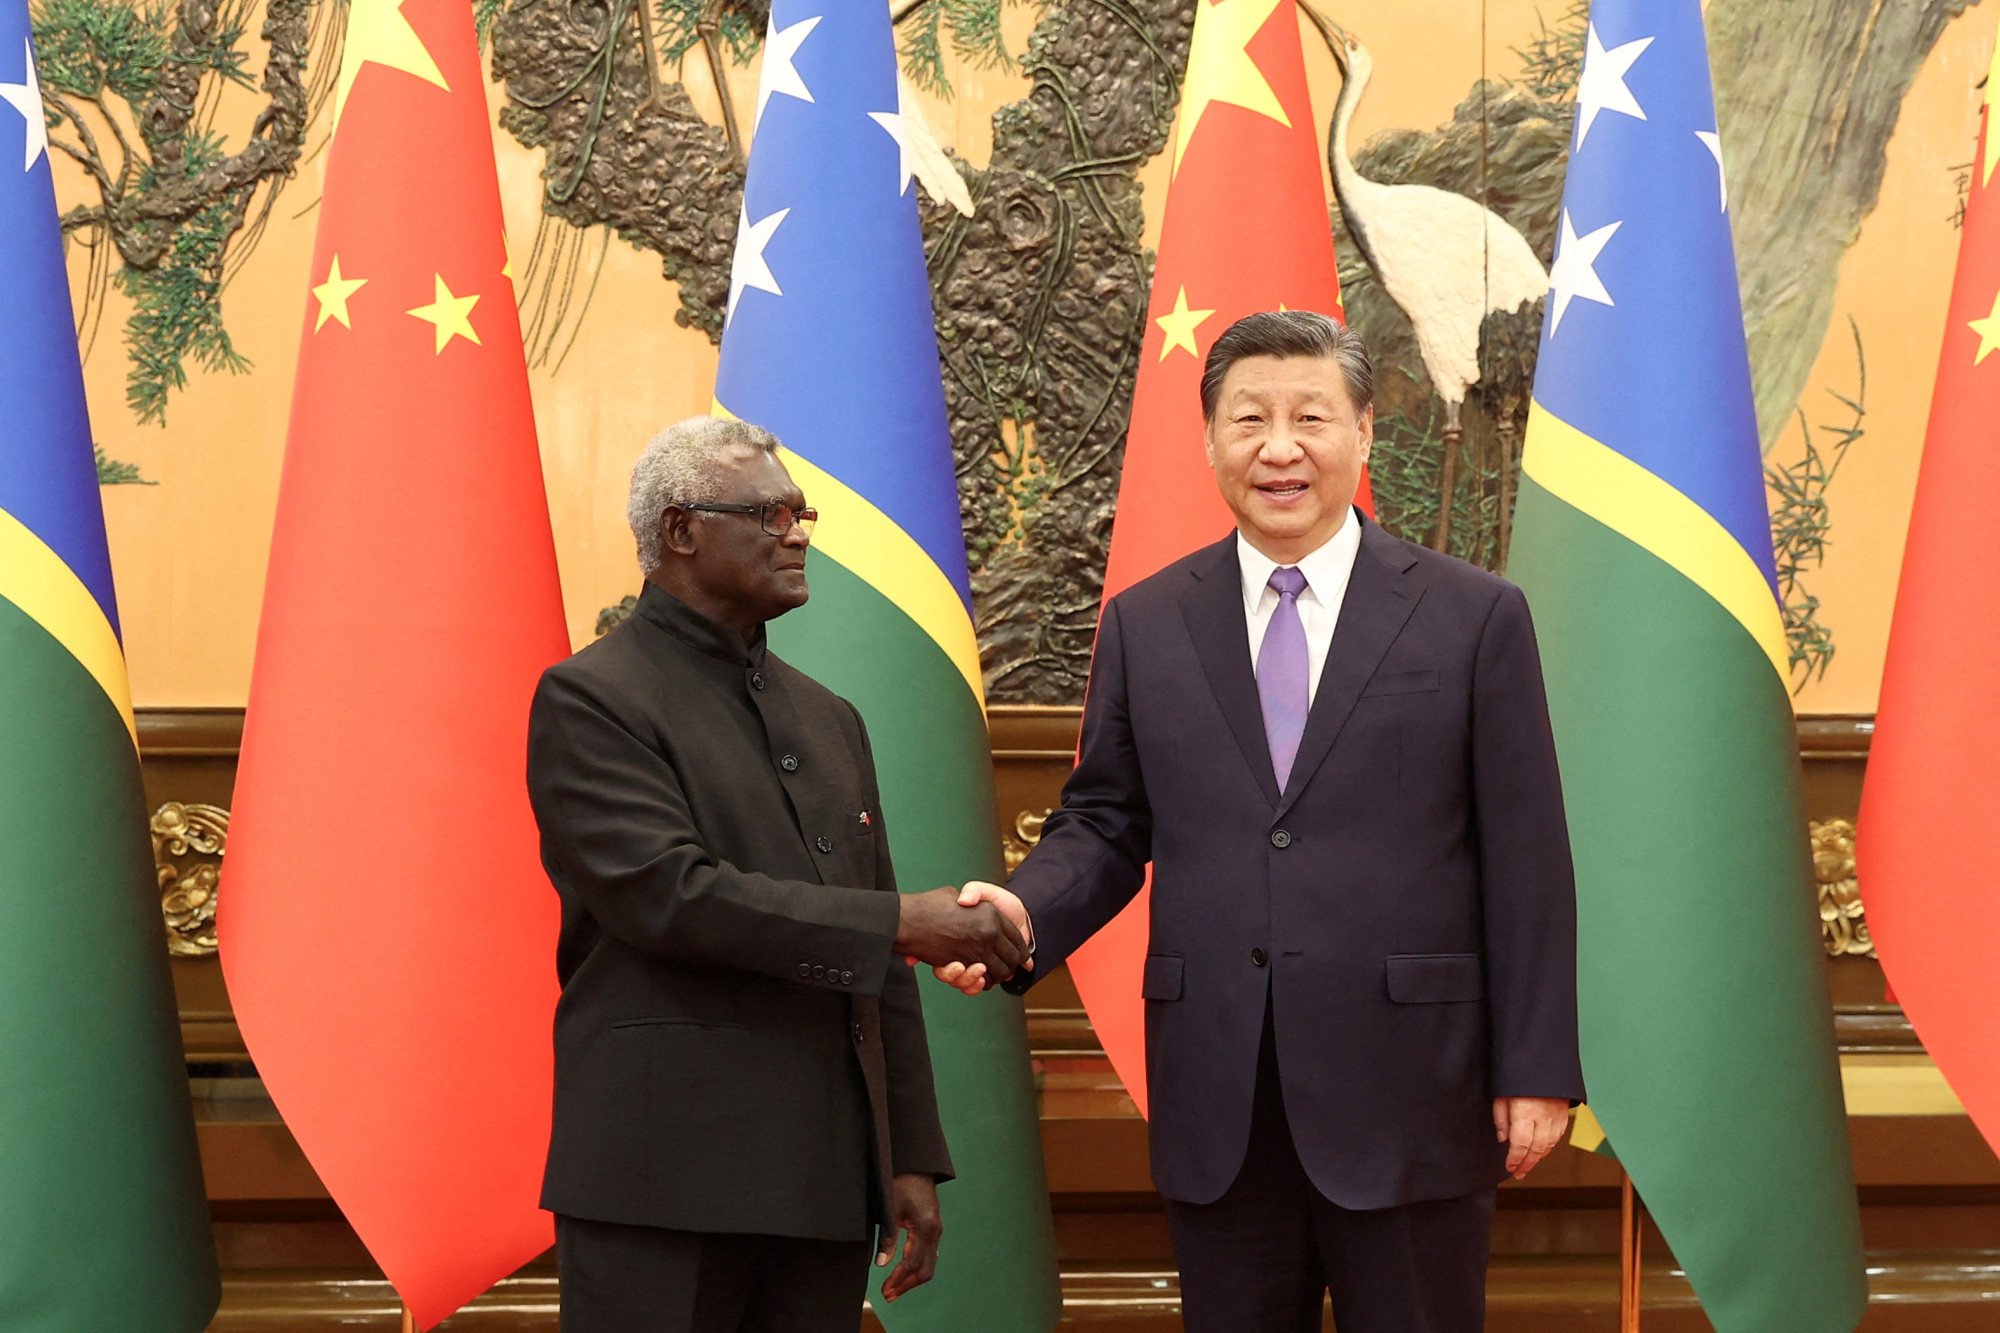 Chinese President Xi Jinping and Solomon Islands Prime Minister Manasseh Sogavare shake hands at the Great Hall of the People in Beijing, China July 10, 2023. Photo: Handout via Reuters